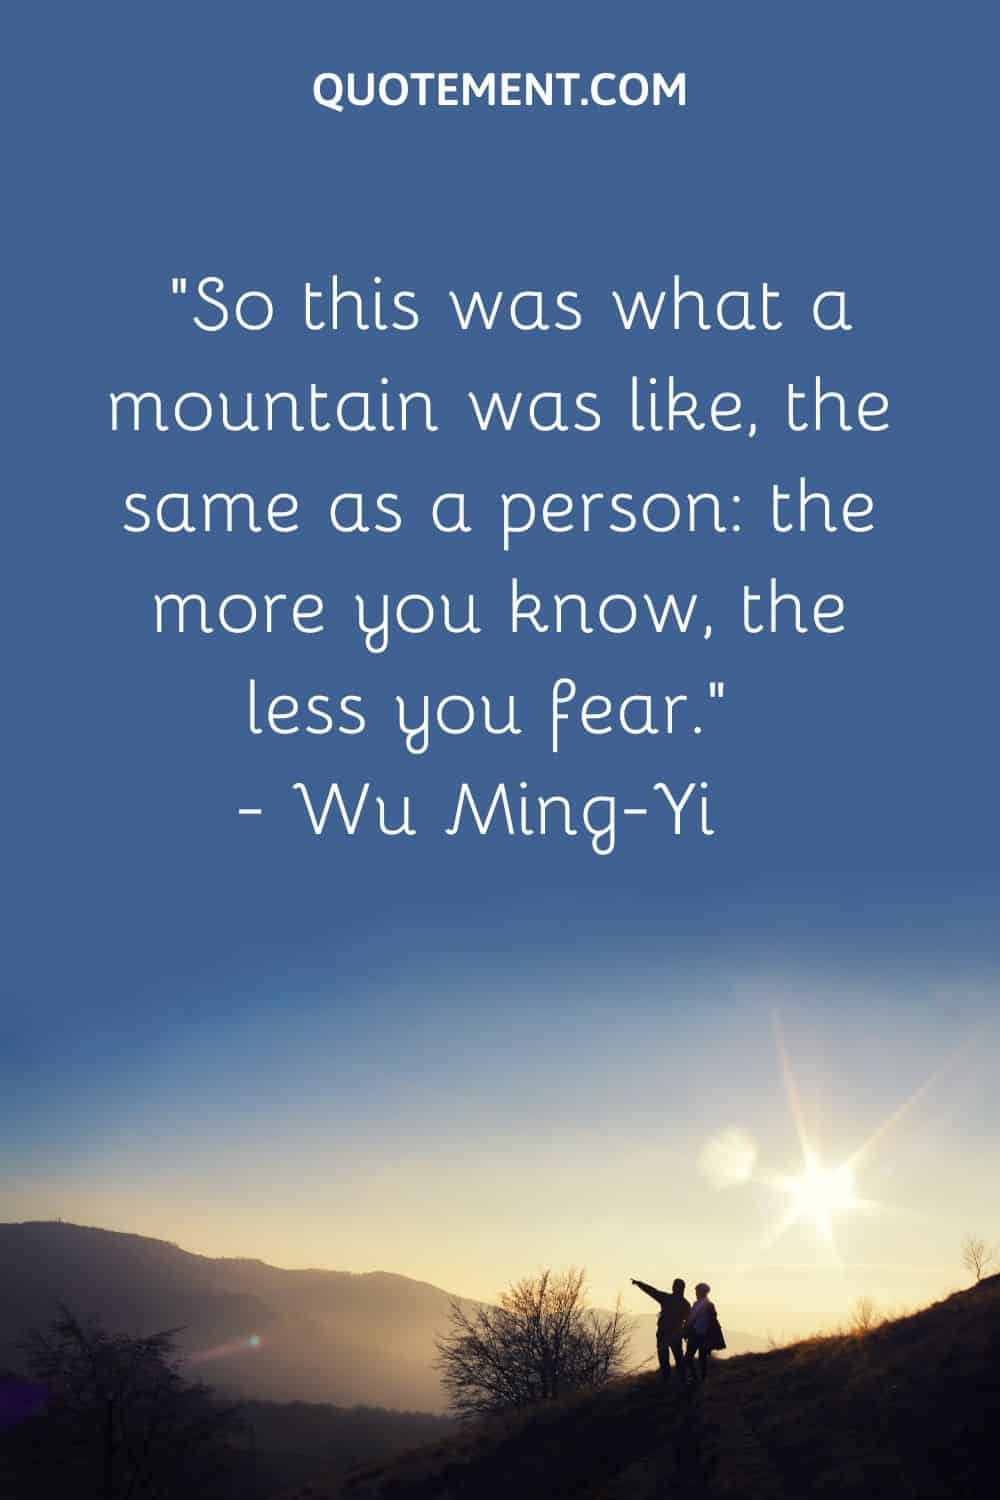 “So this was what a mountain was like, the same as a person the more you know, the less you fear.” — Wu Ming—Yi